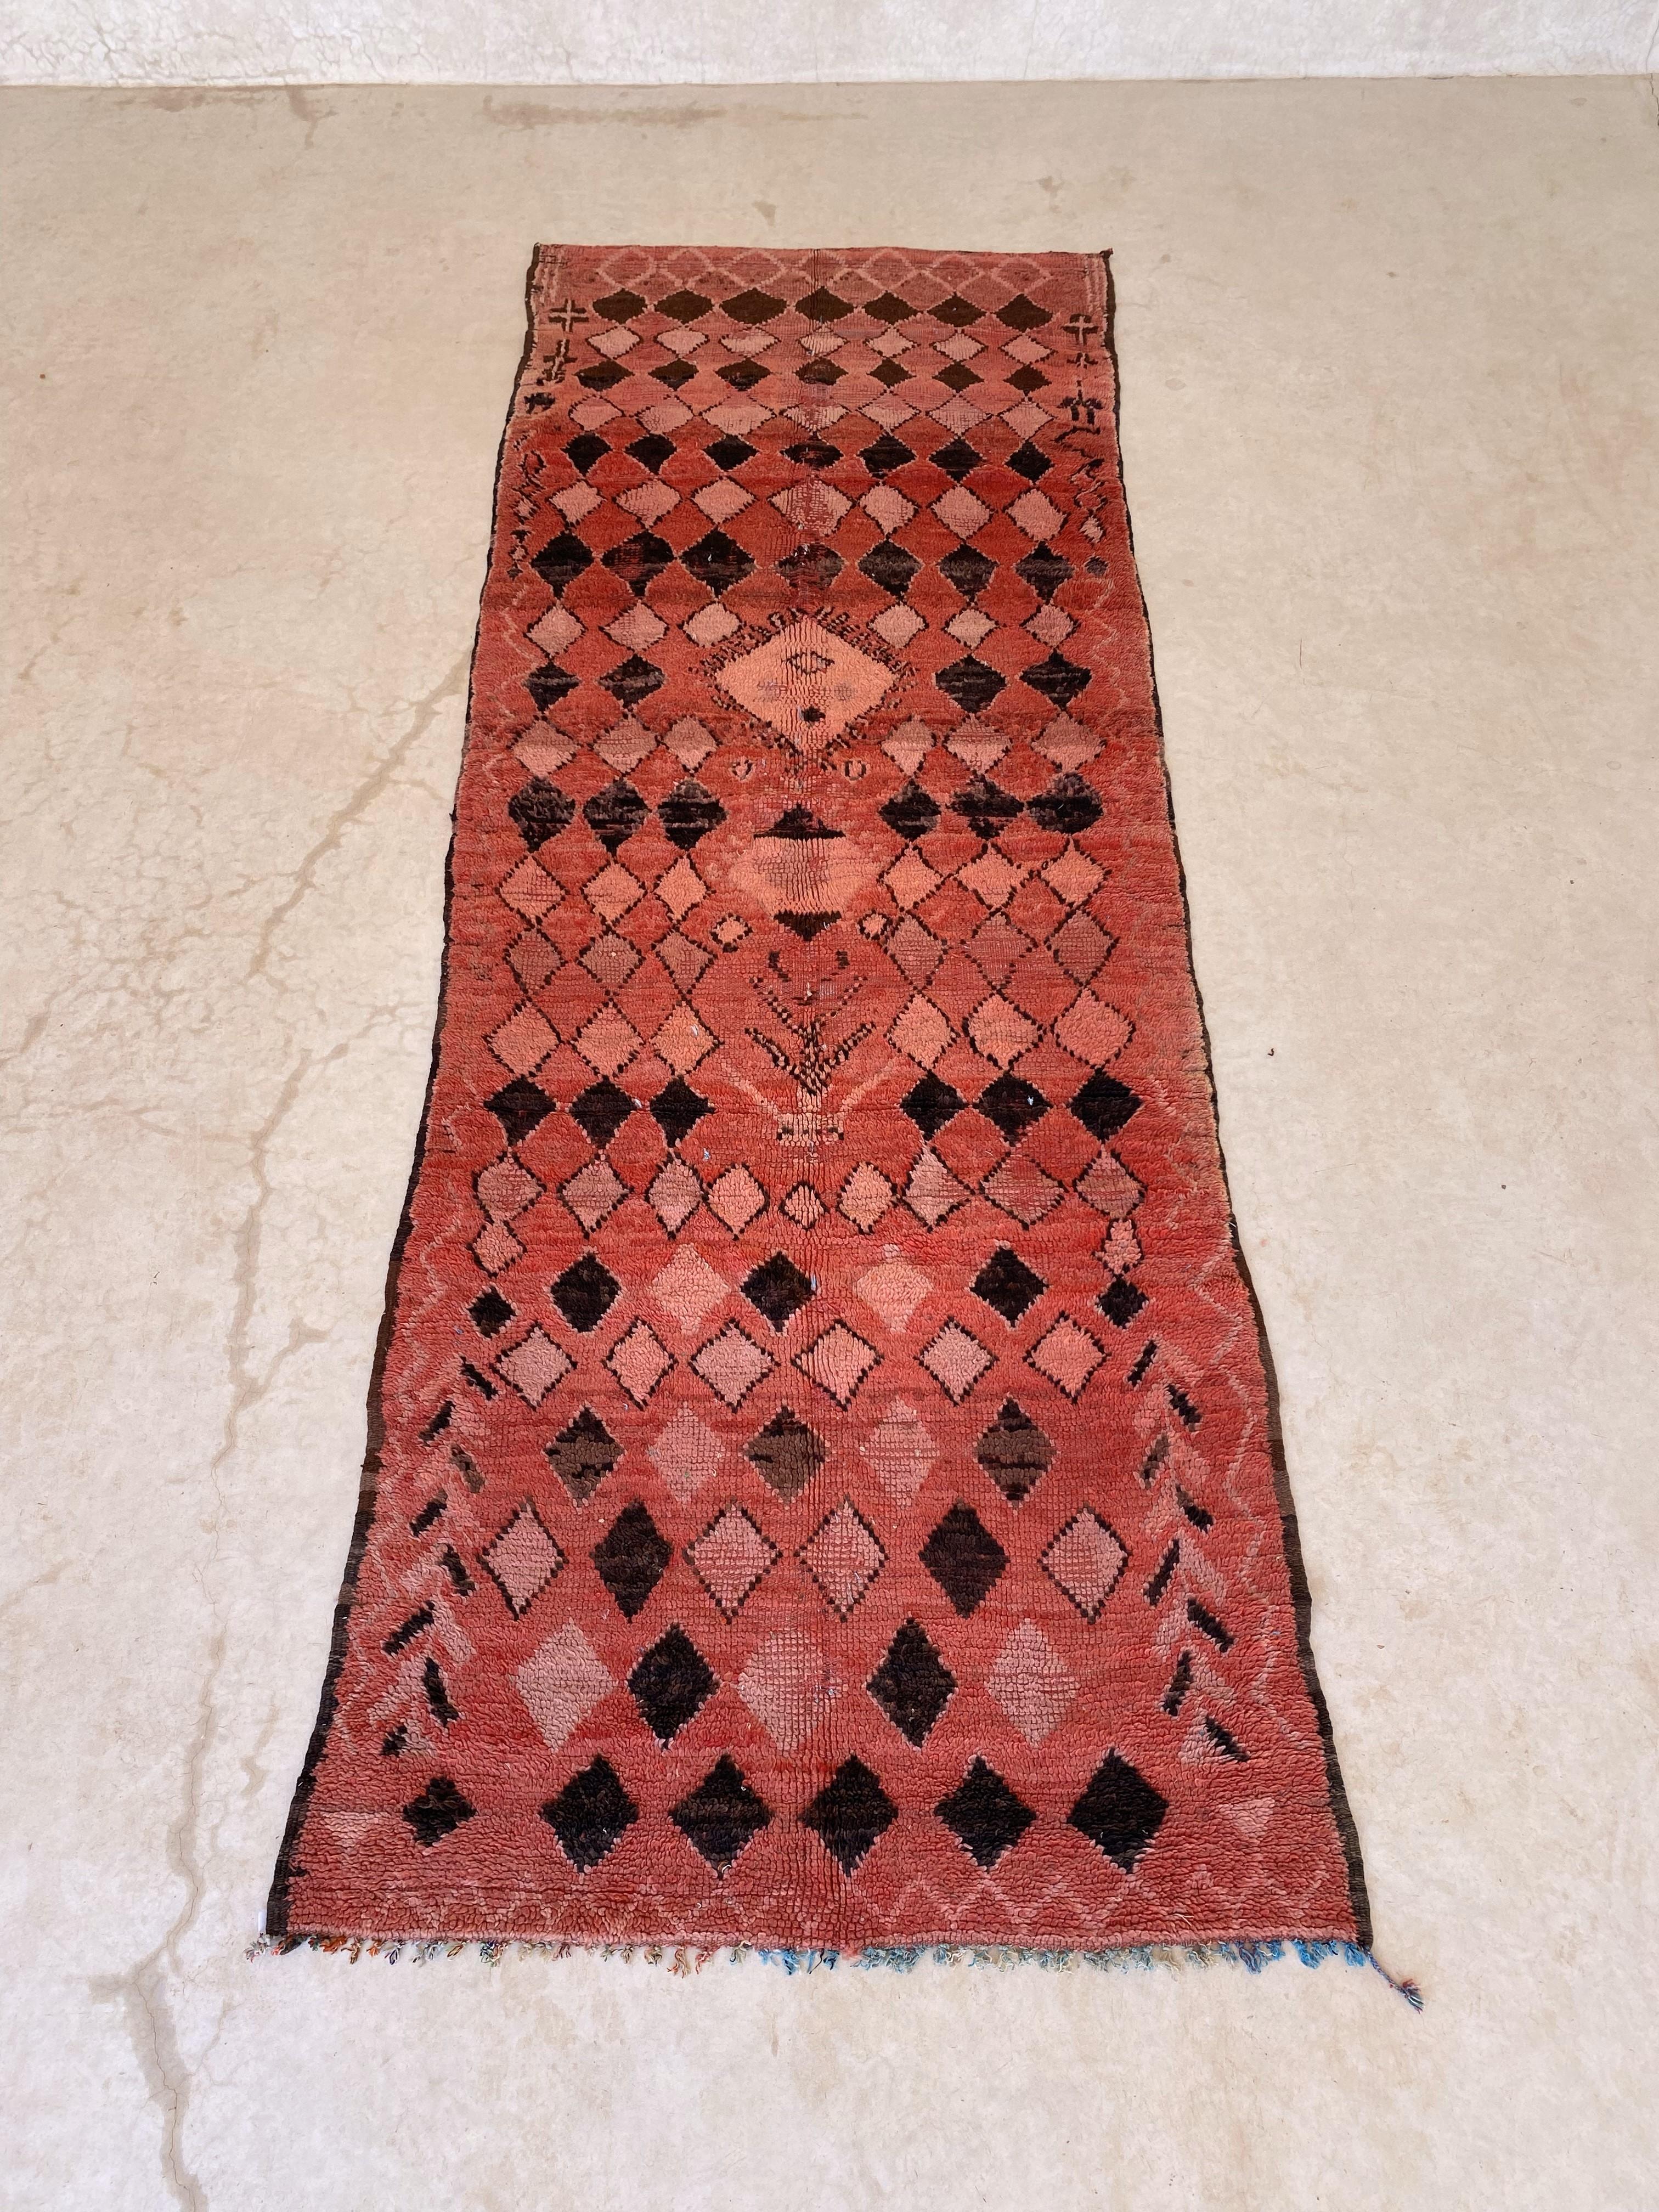 How beautiful is this vintage Boujad runner rug!! While posting the pictures and video I realize that the rug should actually be read the other way, tiny tassels up just like the last pictures attached. Why that? There is a figure in the center of